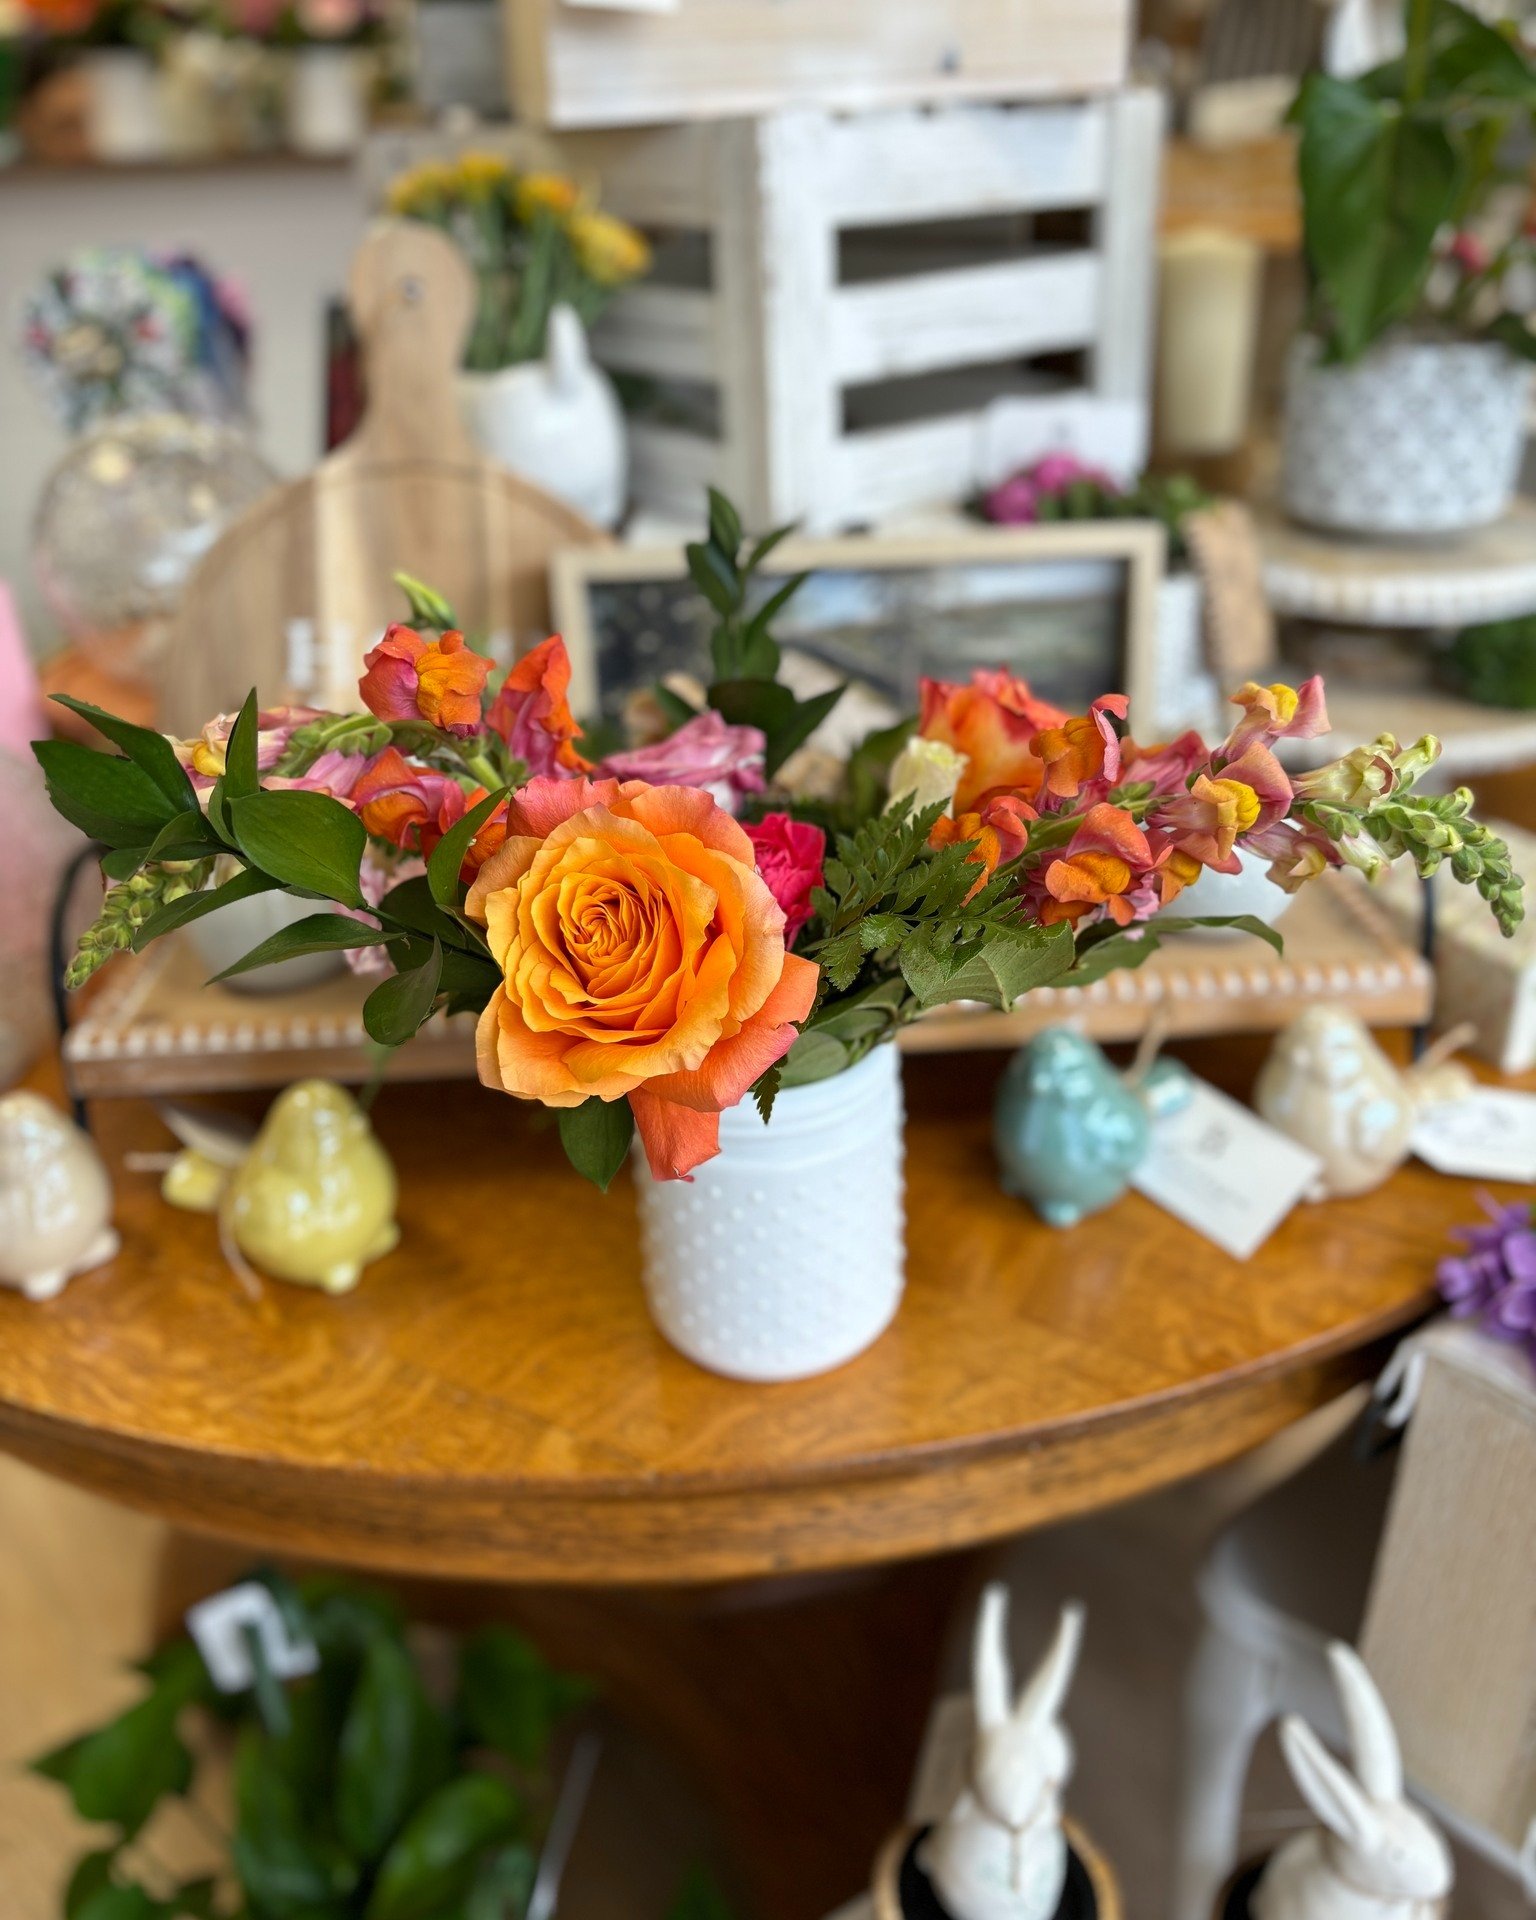 Lots of items ready to go!
Petite Vase Arrangements - $60
Birdhouse Arrangements (only 2 available) - $75
Wooden Crate Arrangements (only 2 available) - $75

Message to order, or call the store: 519-923-3063
Open until 6pm today, and 9am-3pm tomorrow